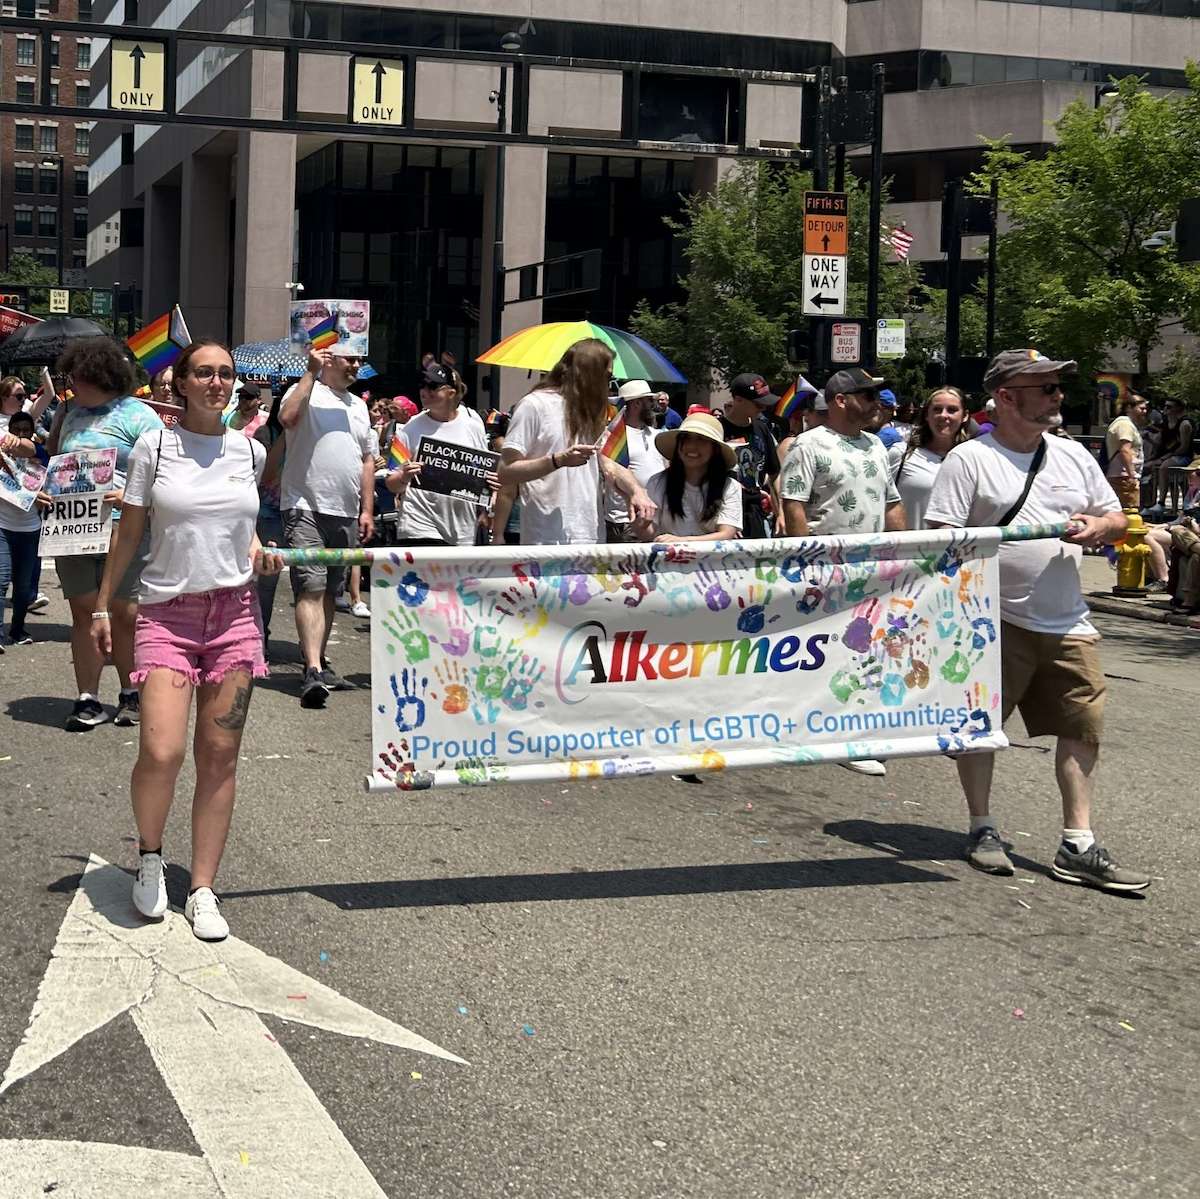 People walking with a banner that says Alkermes Proud Supporter of LGBTQ+